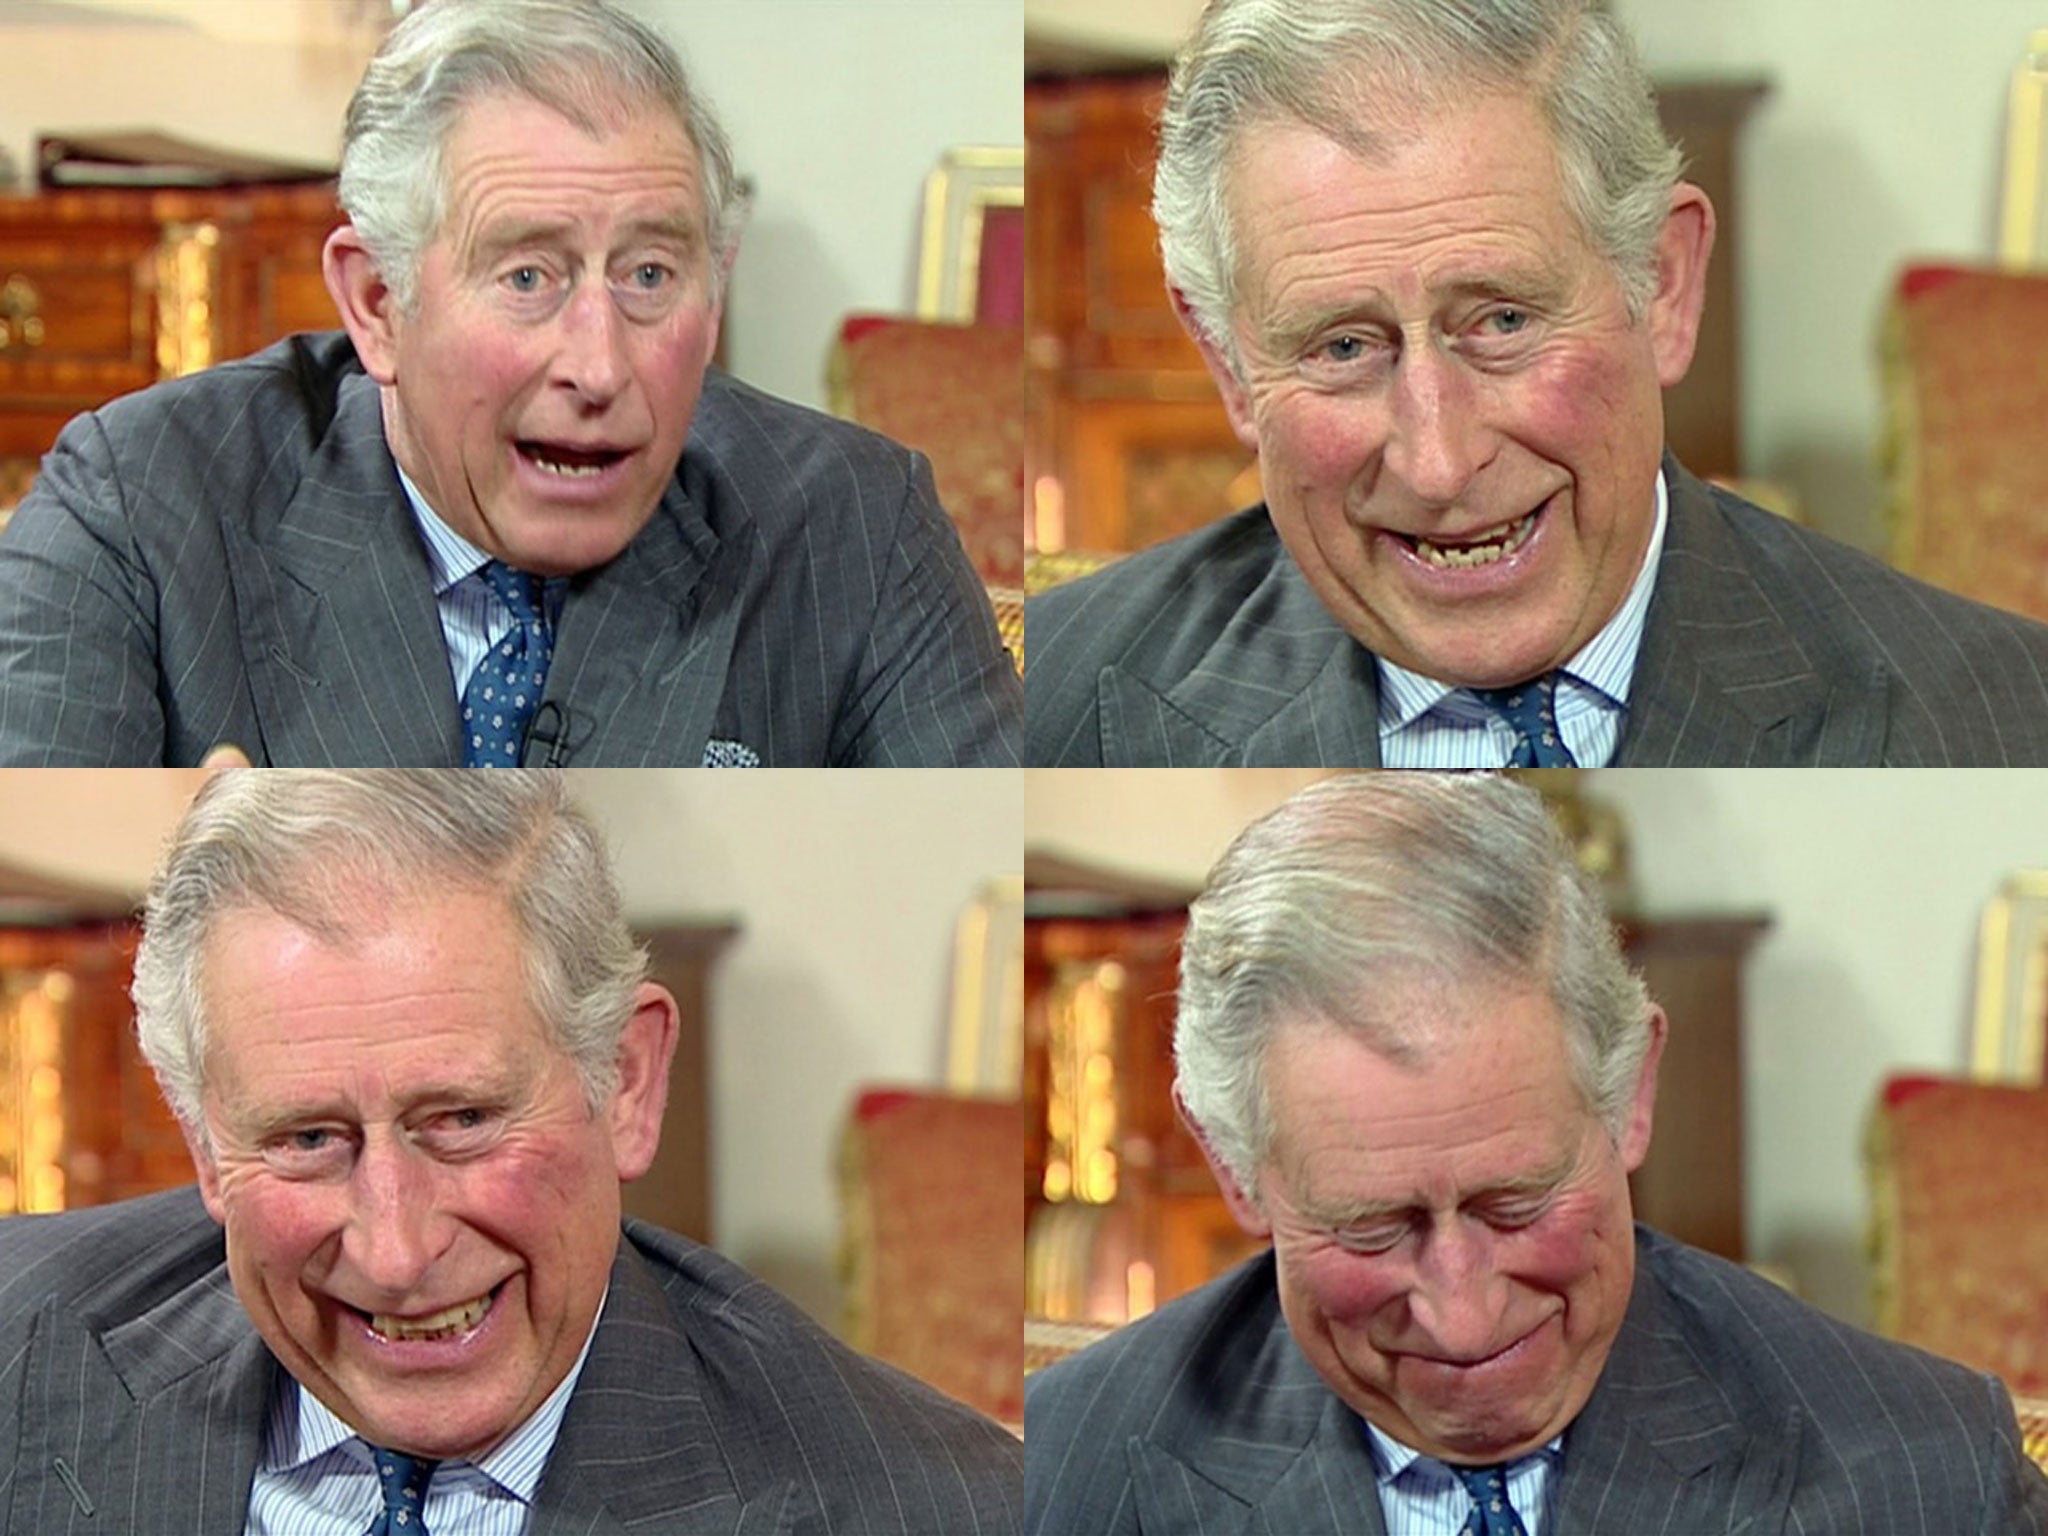 What Prince Charles said (and what he really meant) on This Morning